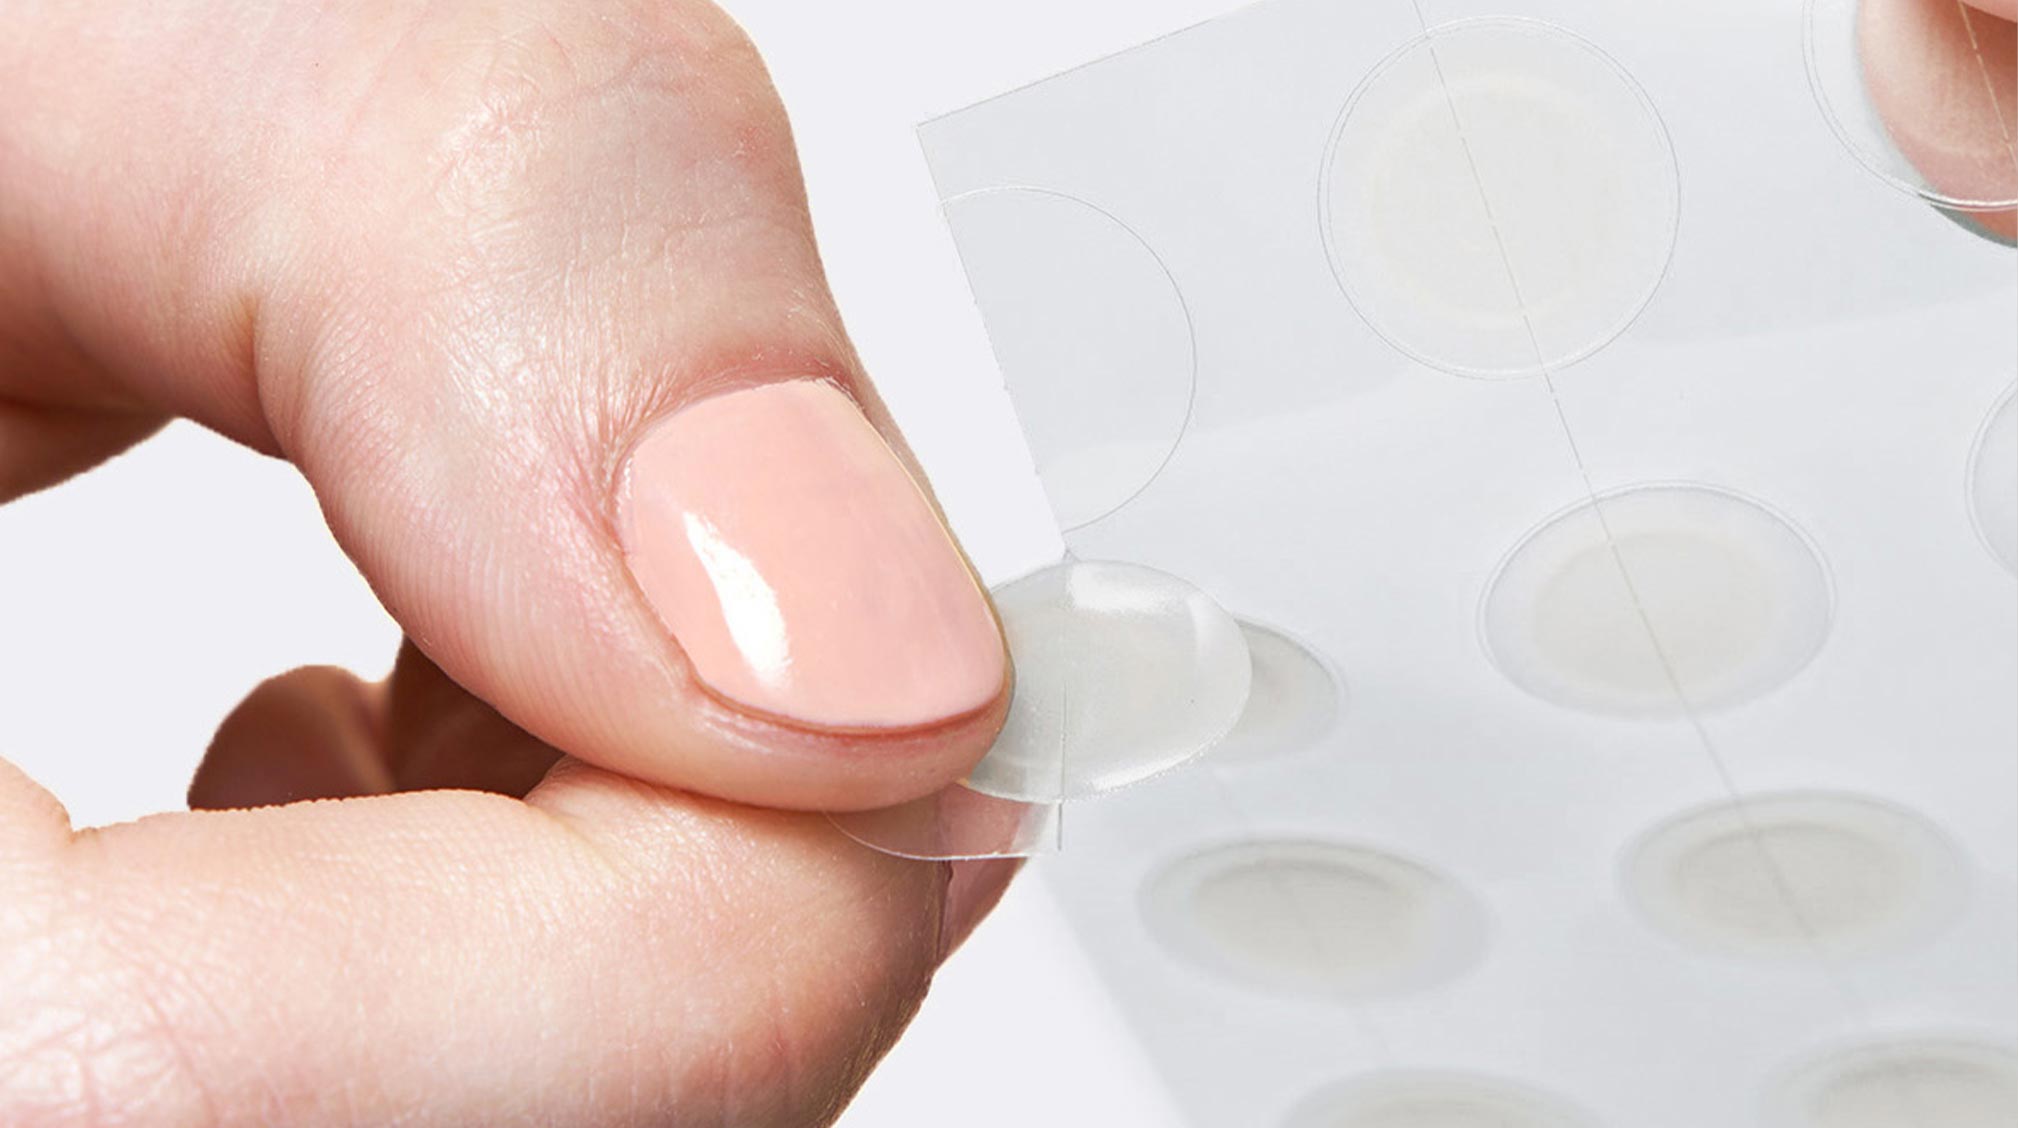 Here's How to Use a Pimple Patch